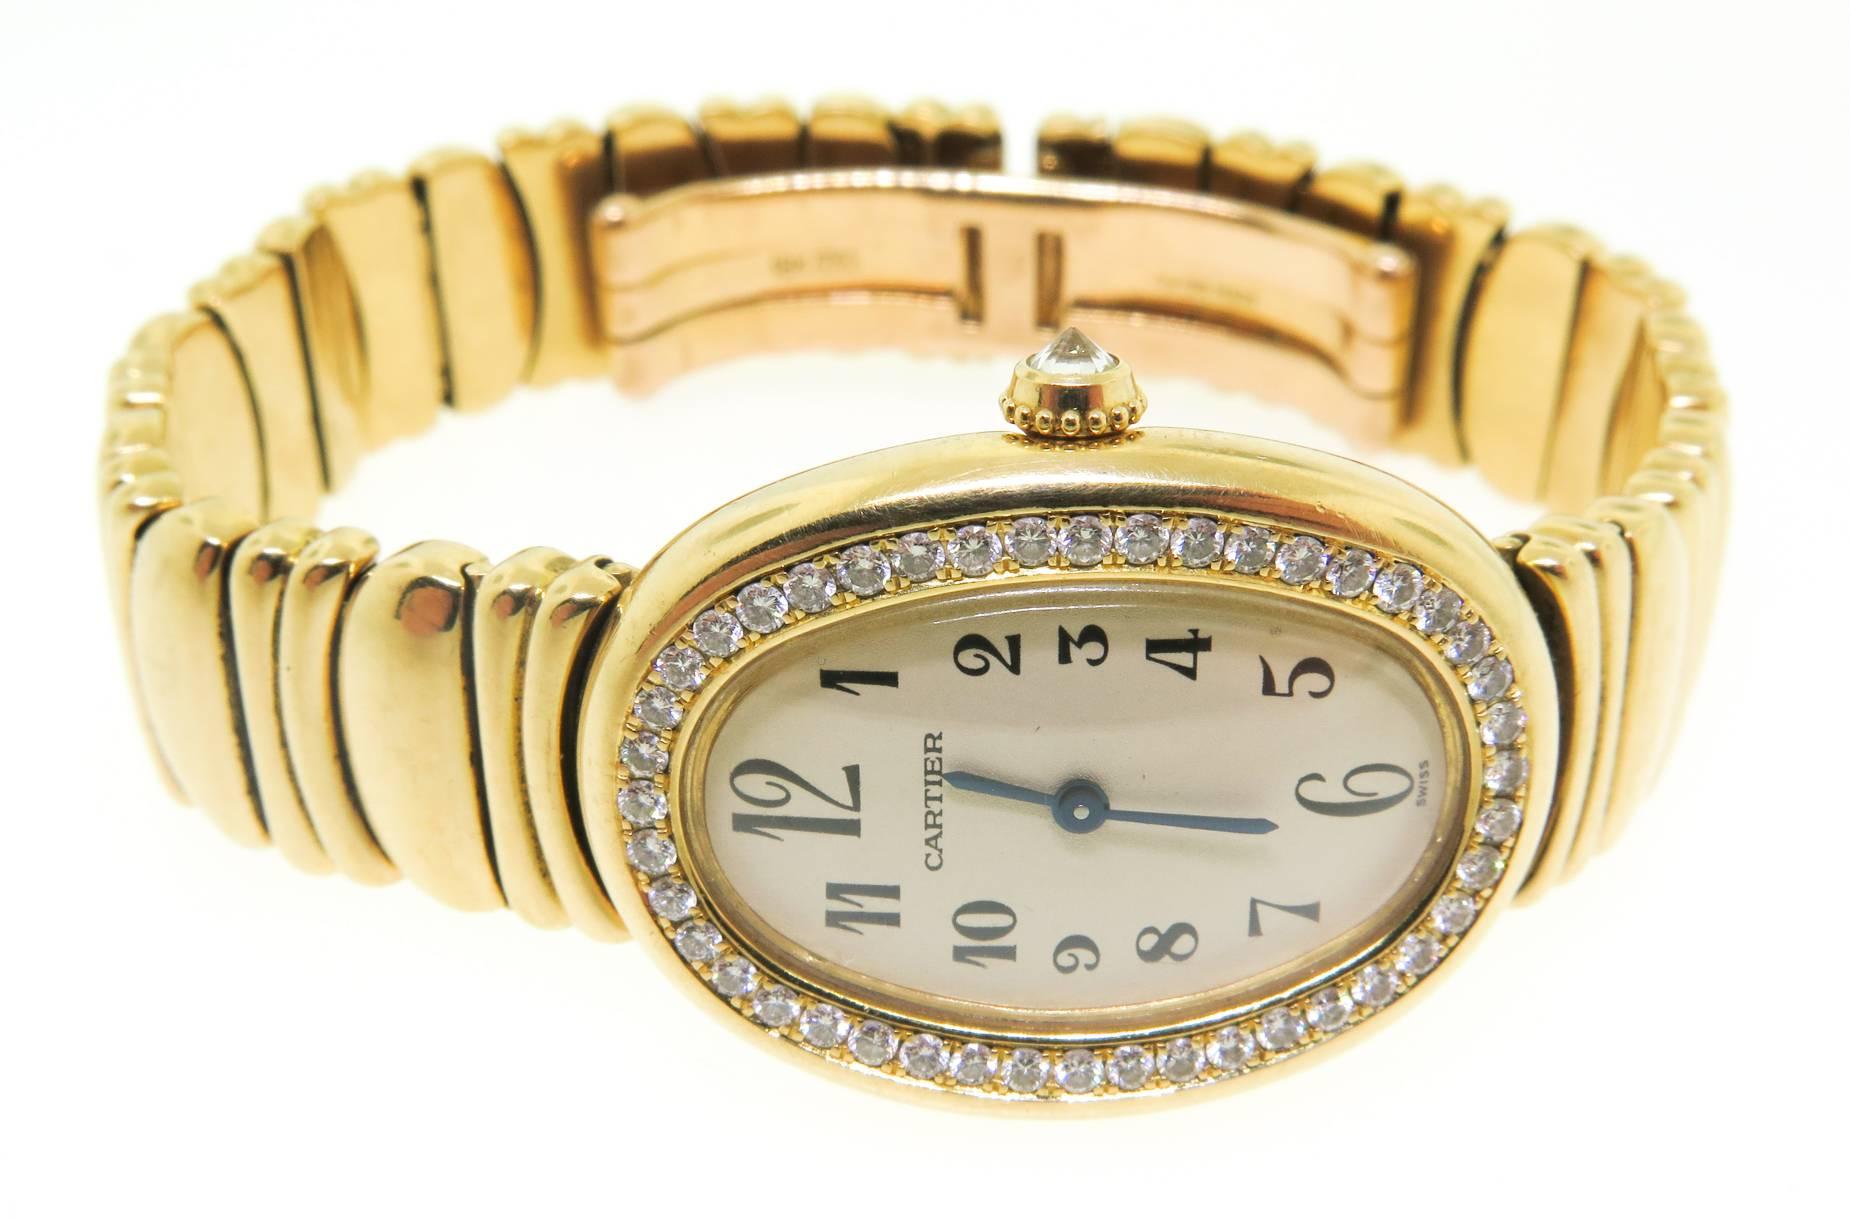 Ladies' 18K yellow gold Cartier Baignoire Swiss made watch with smooth Diamond bezel, white flat dial, black hands, black Arabic hour markers, push/pull crown. Solid 18K yellow gold link bracelet and double deployant closure. Water resistant to 30